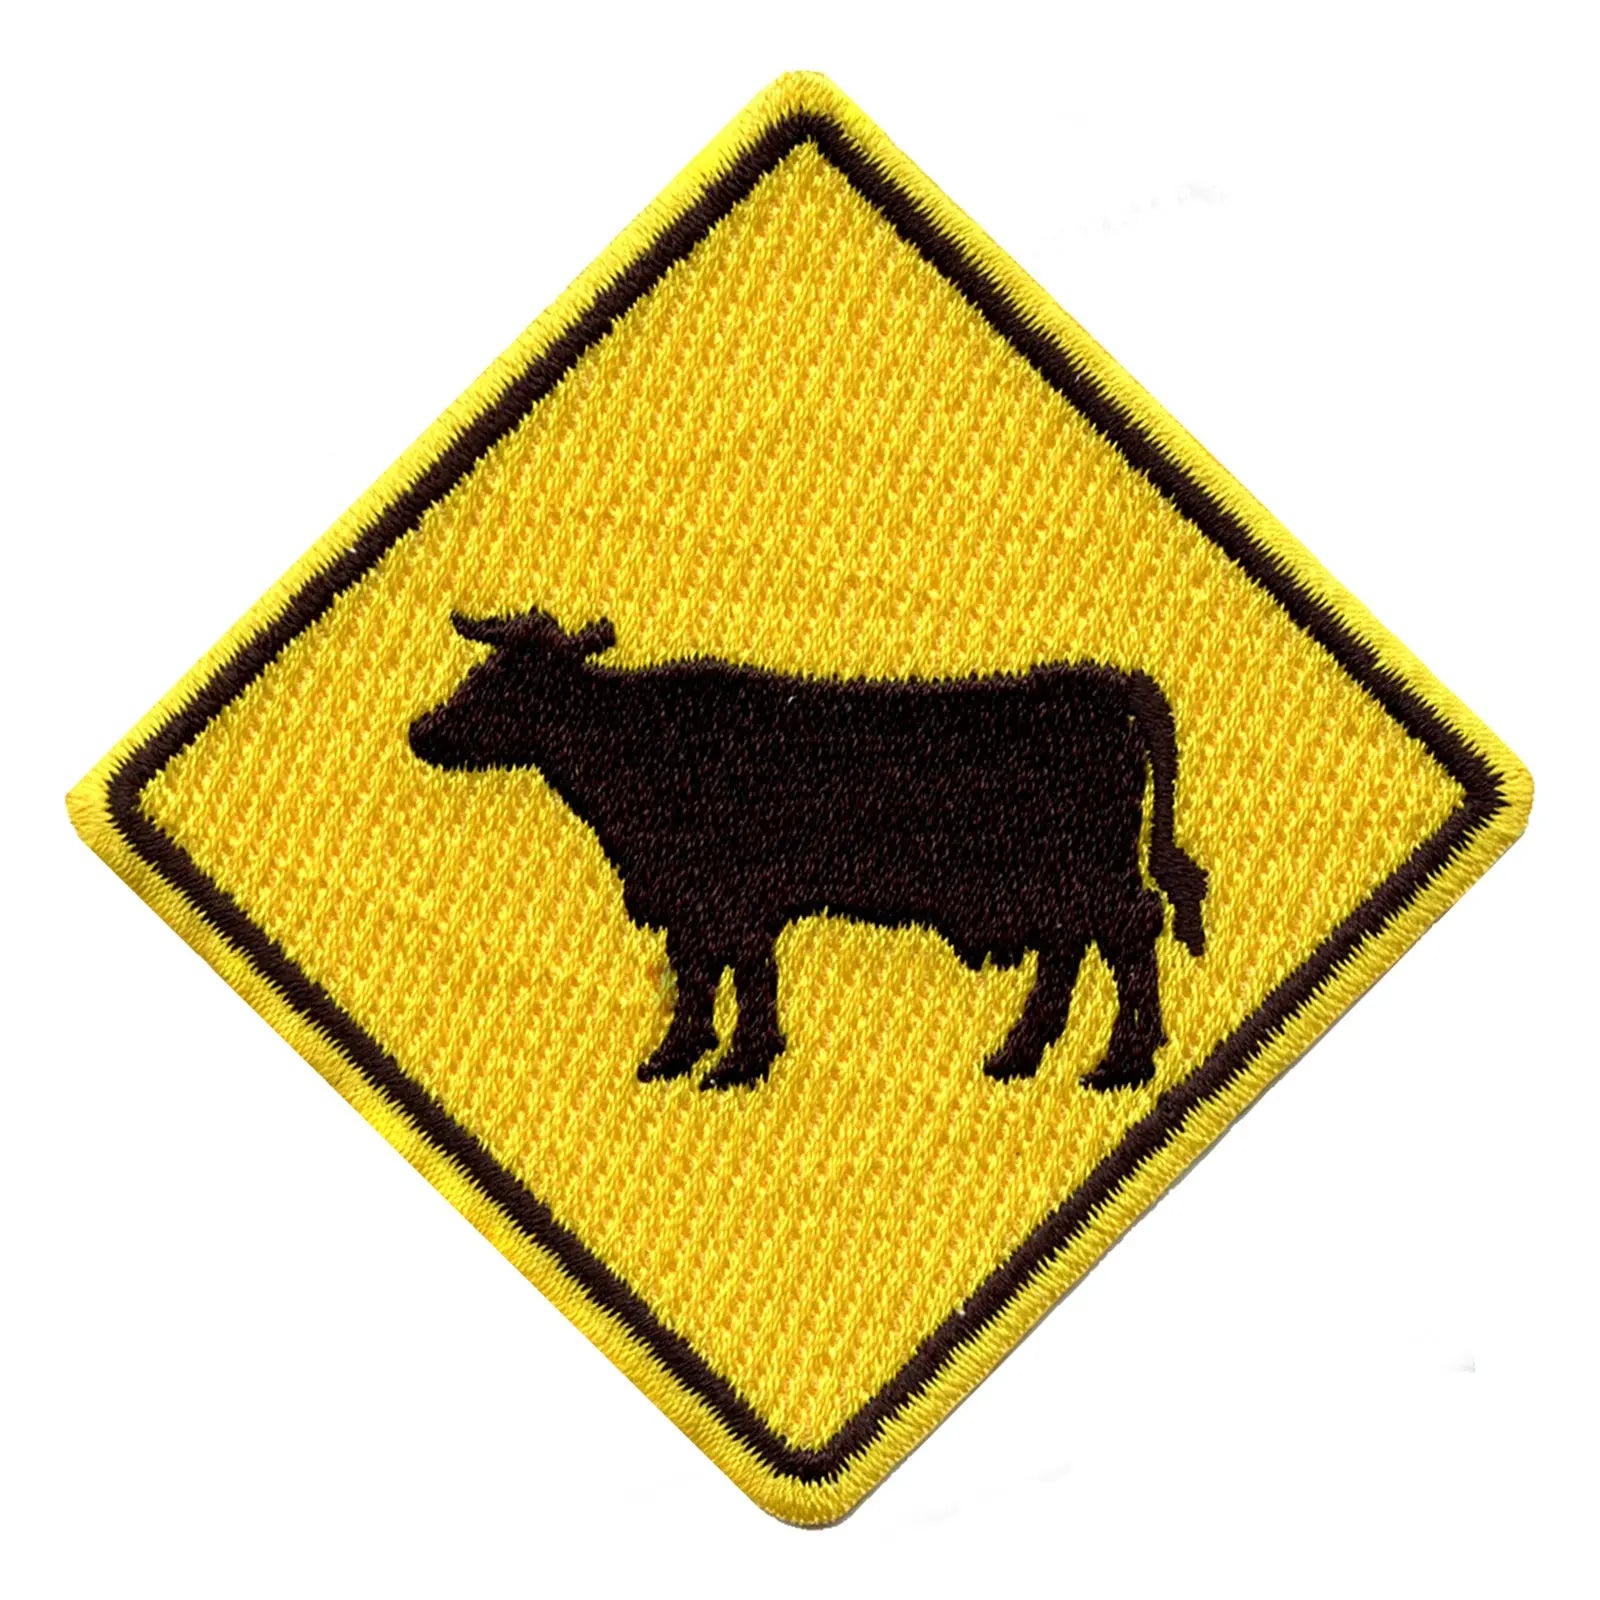 Cow Crossing Yellow Street Sign Embroidered Iron On Patch 